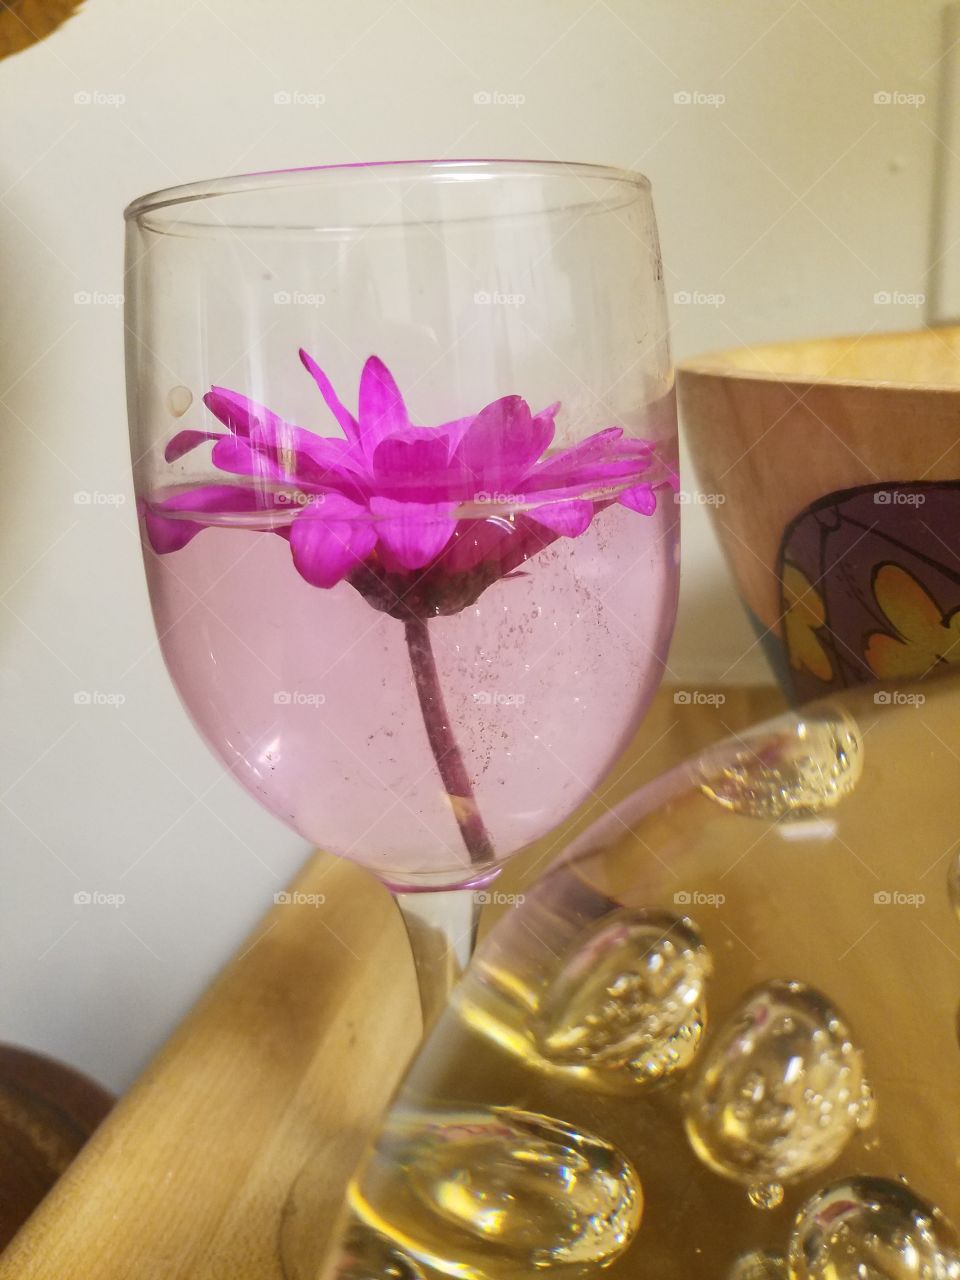 flower floating in a wine glass